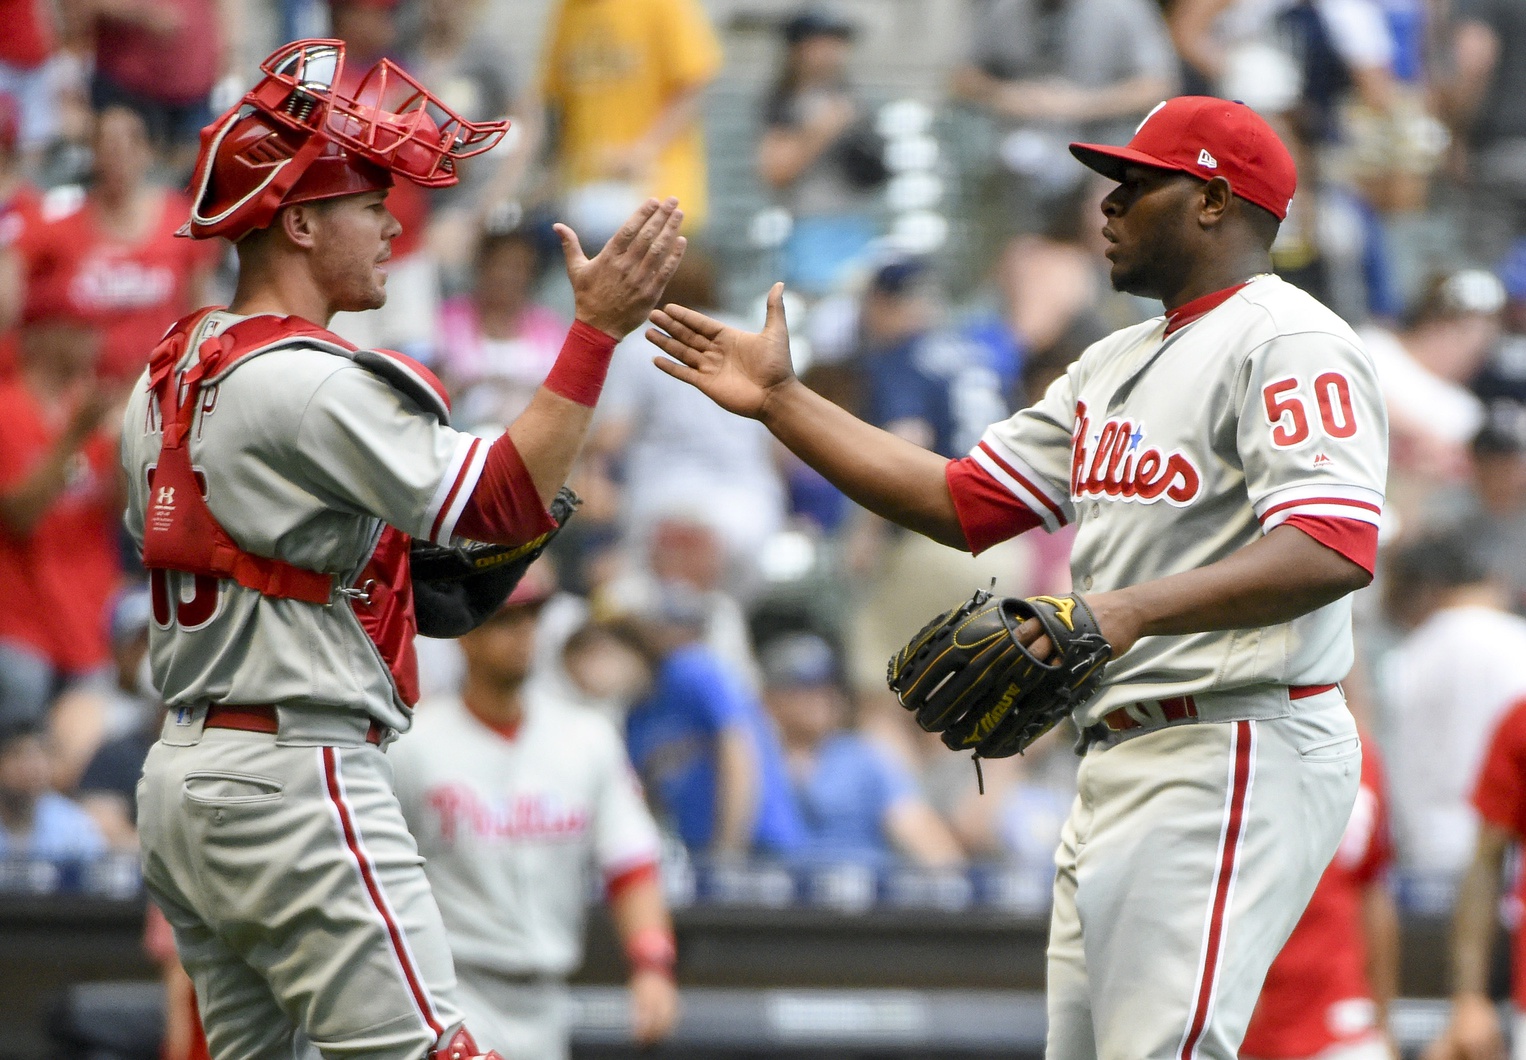 Phillies Recall Hector Neris, Send J.P. Crawford to Triple-A